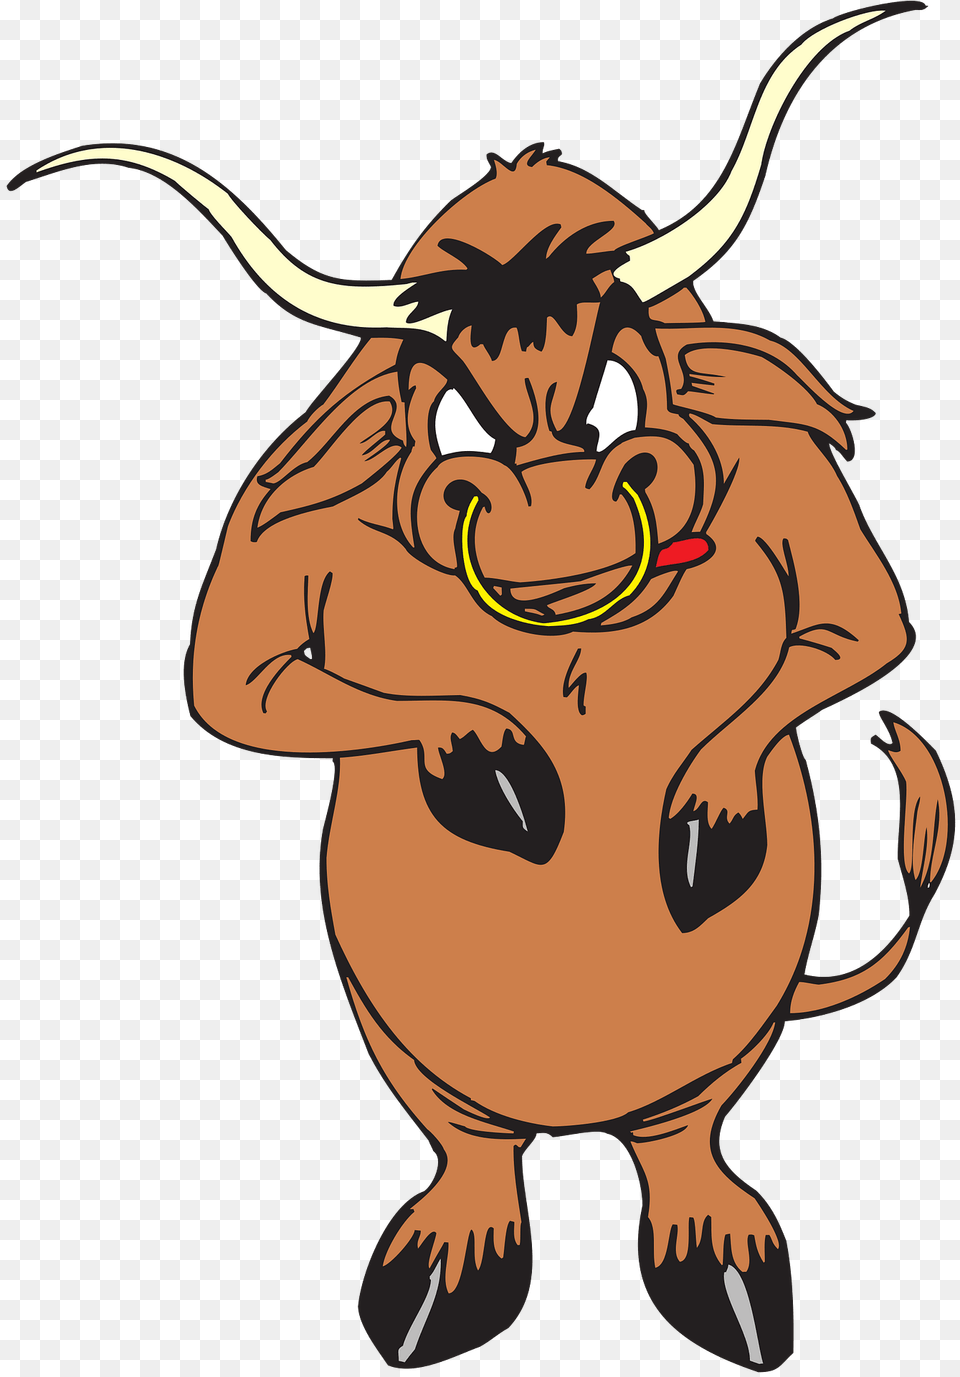 Bull With Ring In Its Nose Clipart, Animal, Mammal, Cattle, Livestock Png Image